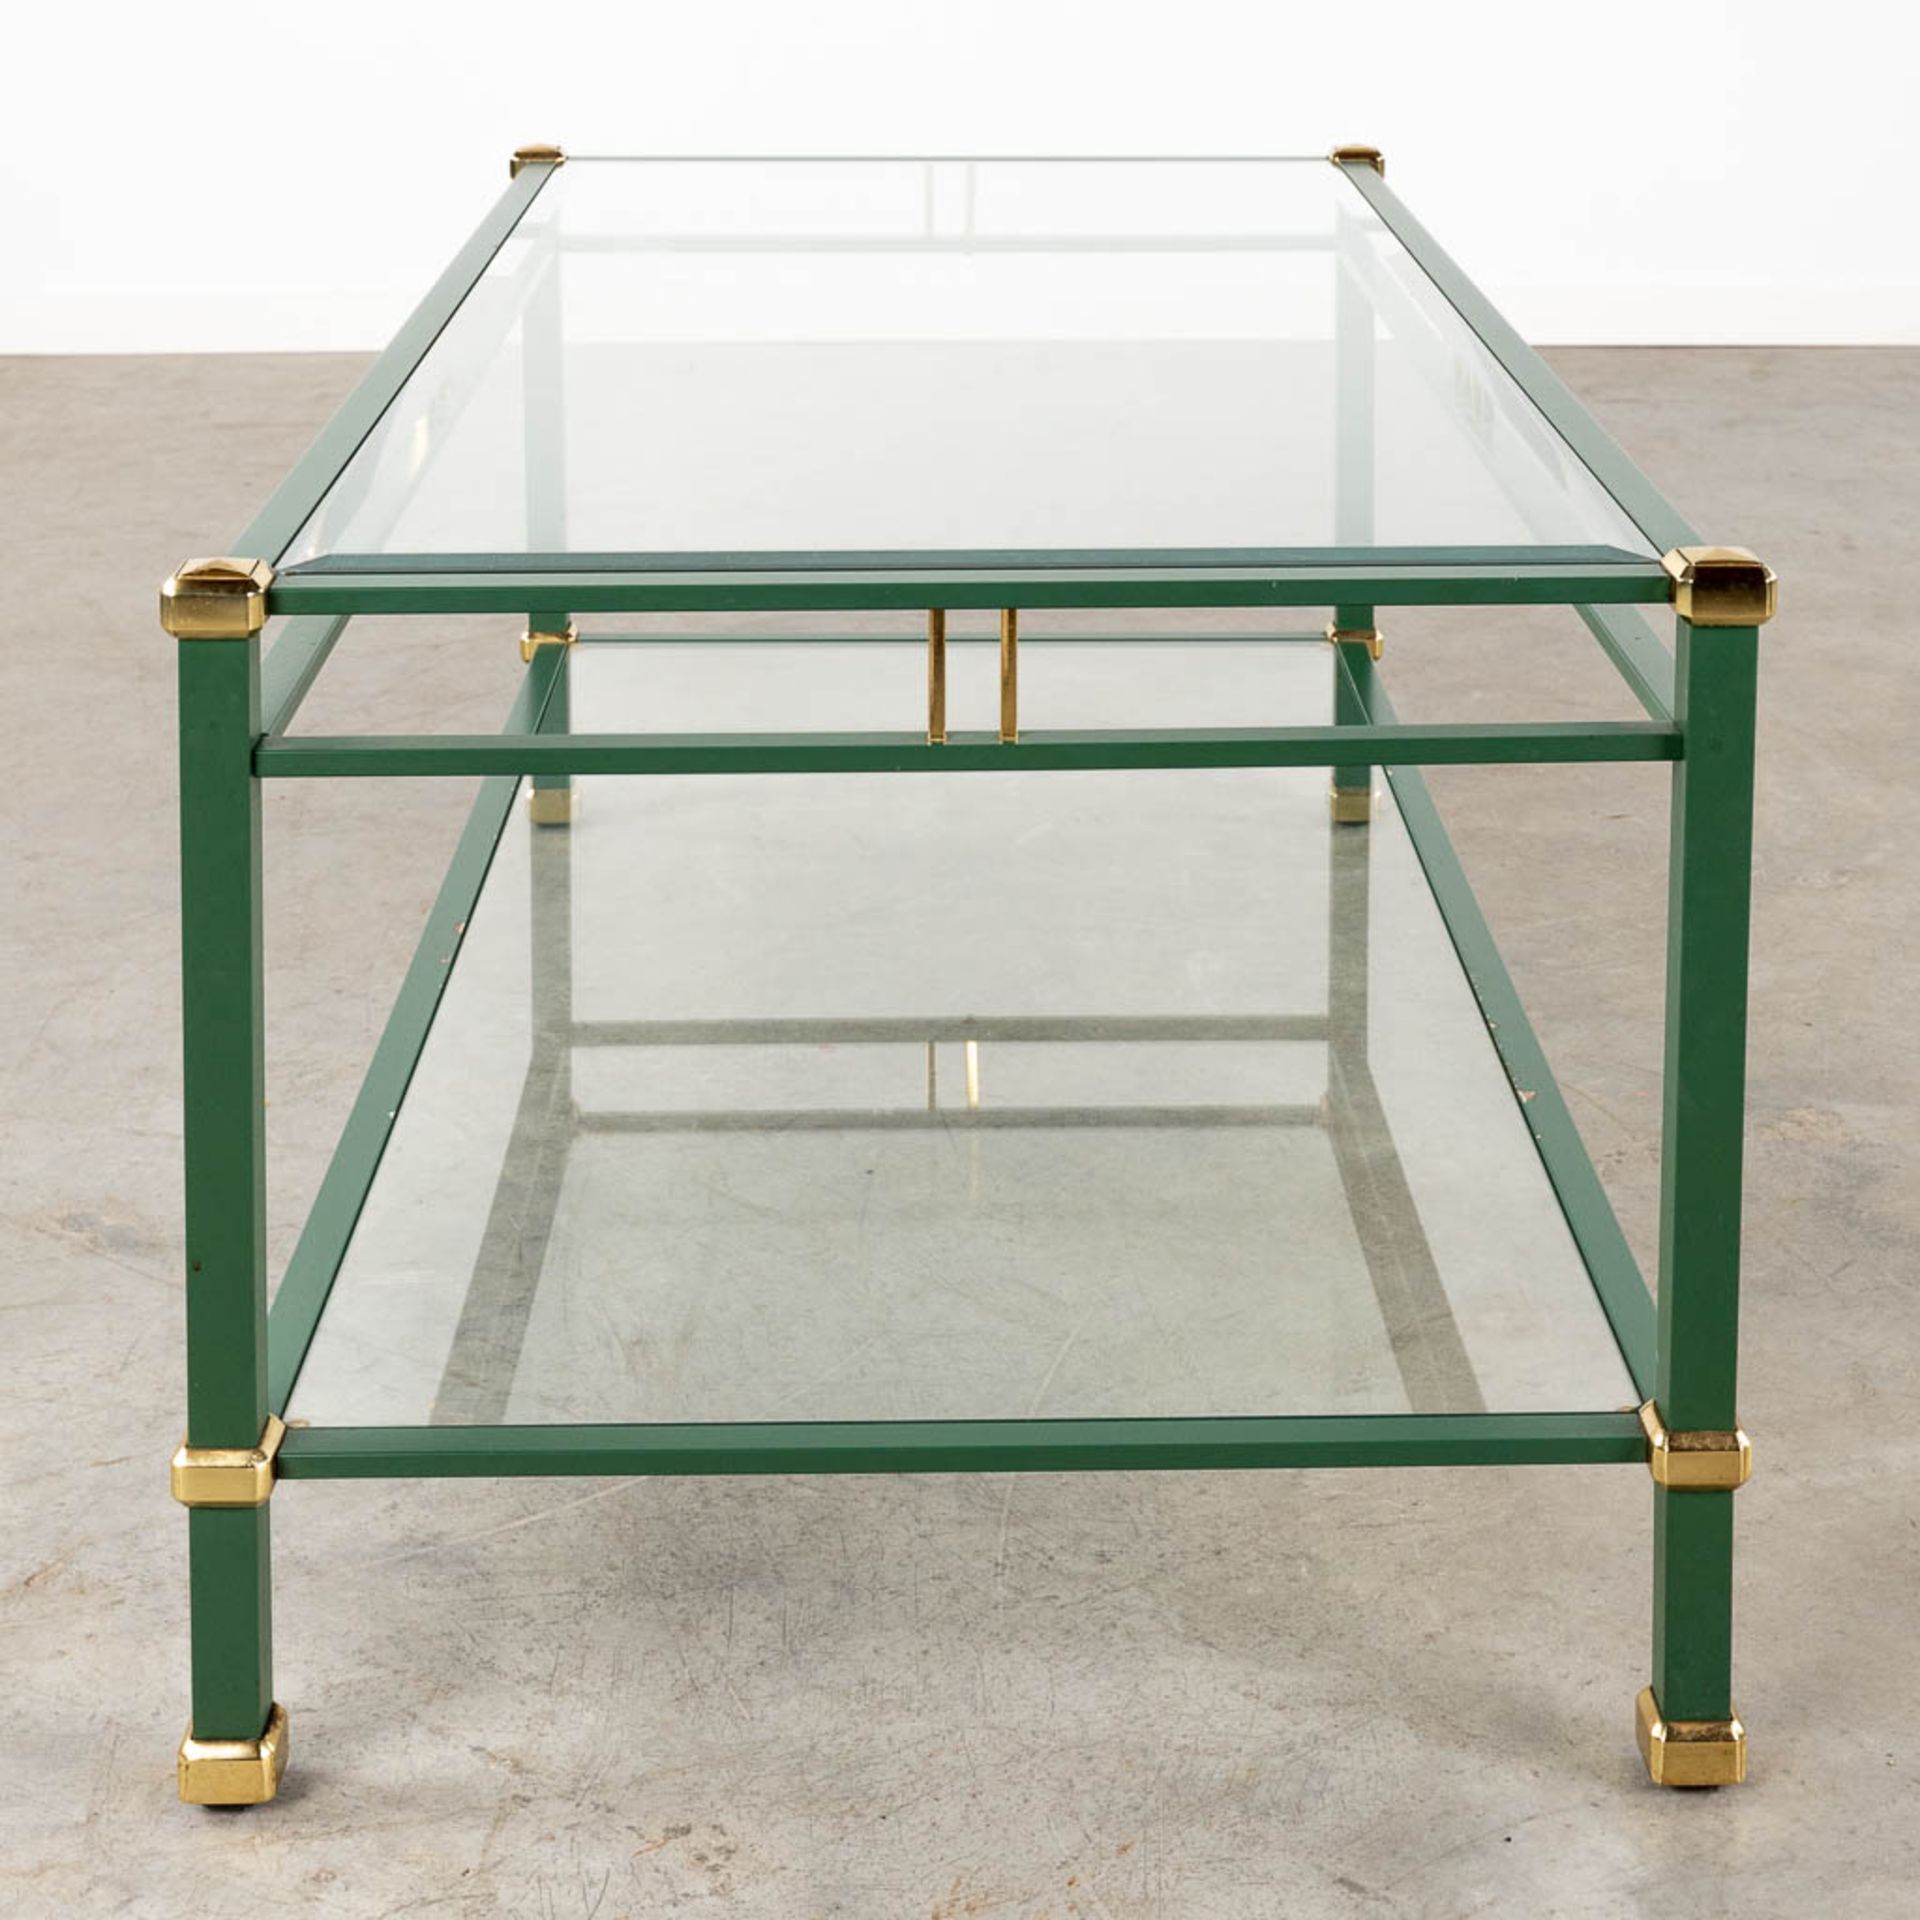 4 matching coffee and side tables, lacquered metal and glass, circa 1980. (L:58 x W:118 x H:46 cm) - Bild 6 aus 13